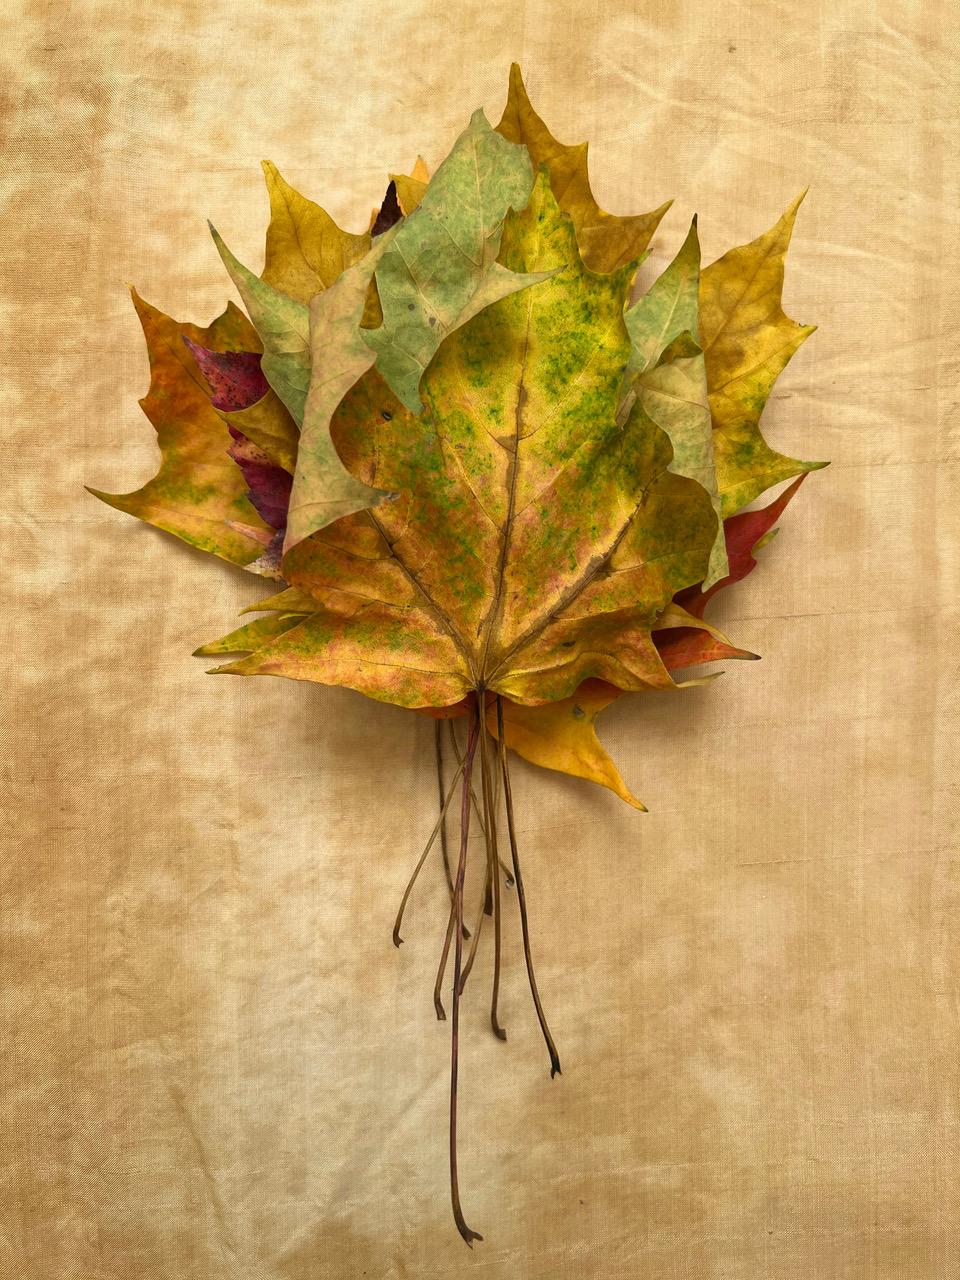 Nine Leaves: grid w/ nature still life leaf photographs in gold, red, green For Sale 4